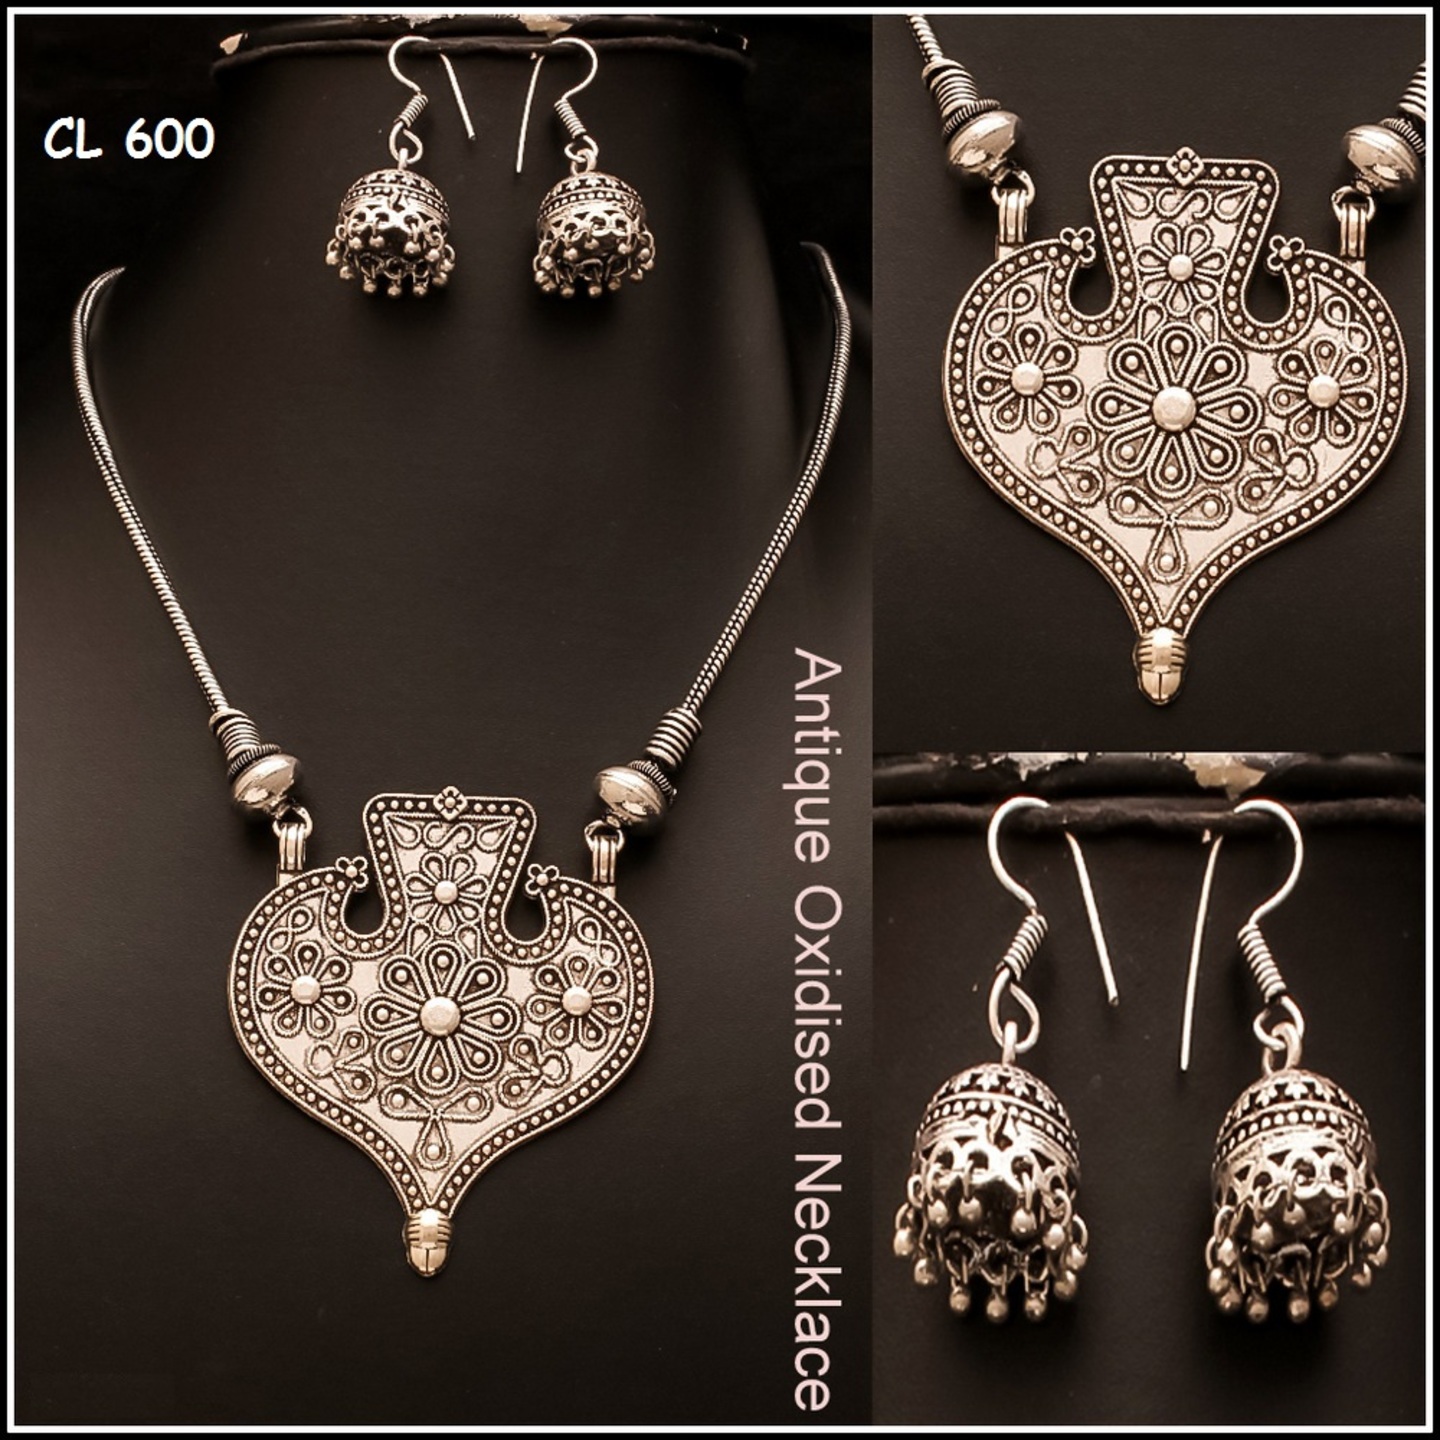 Antique Oxidised Neck-piece set ...Available in 3 different varieties.